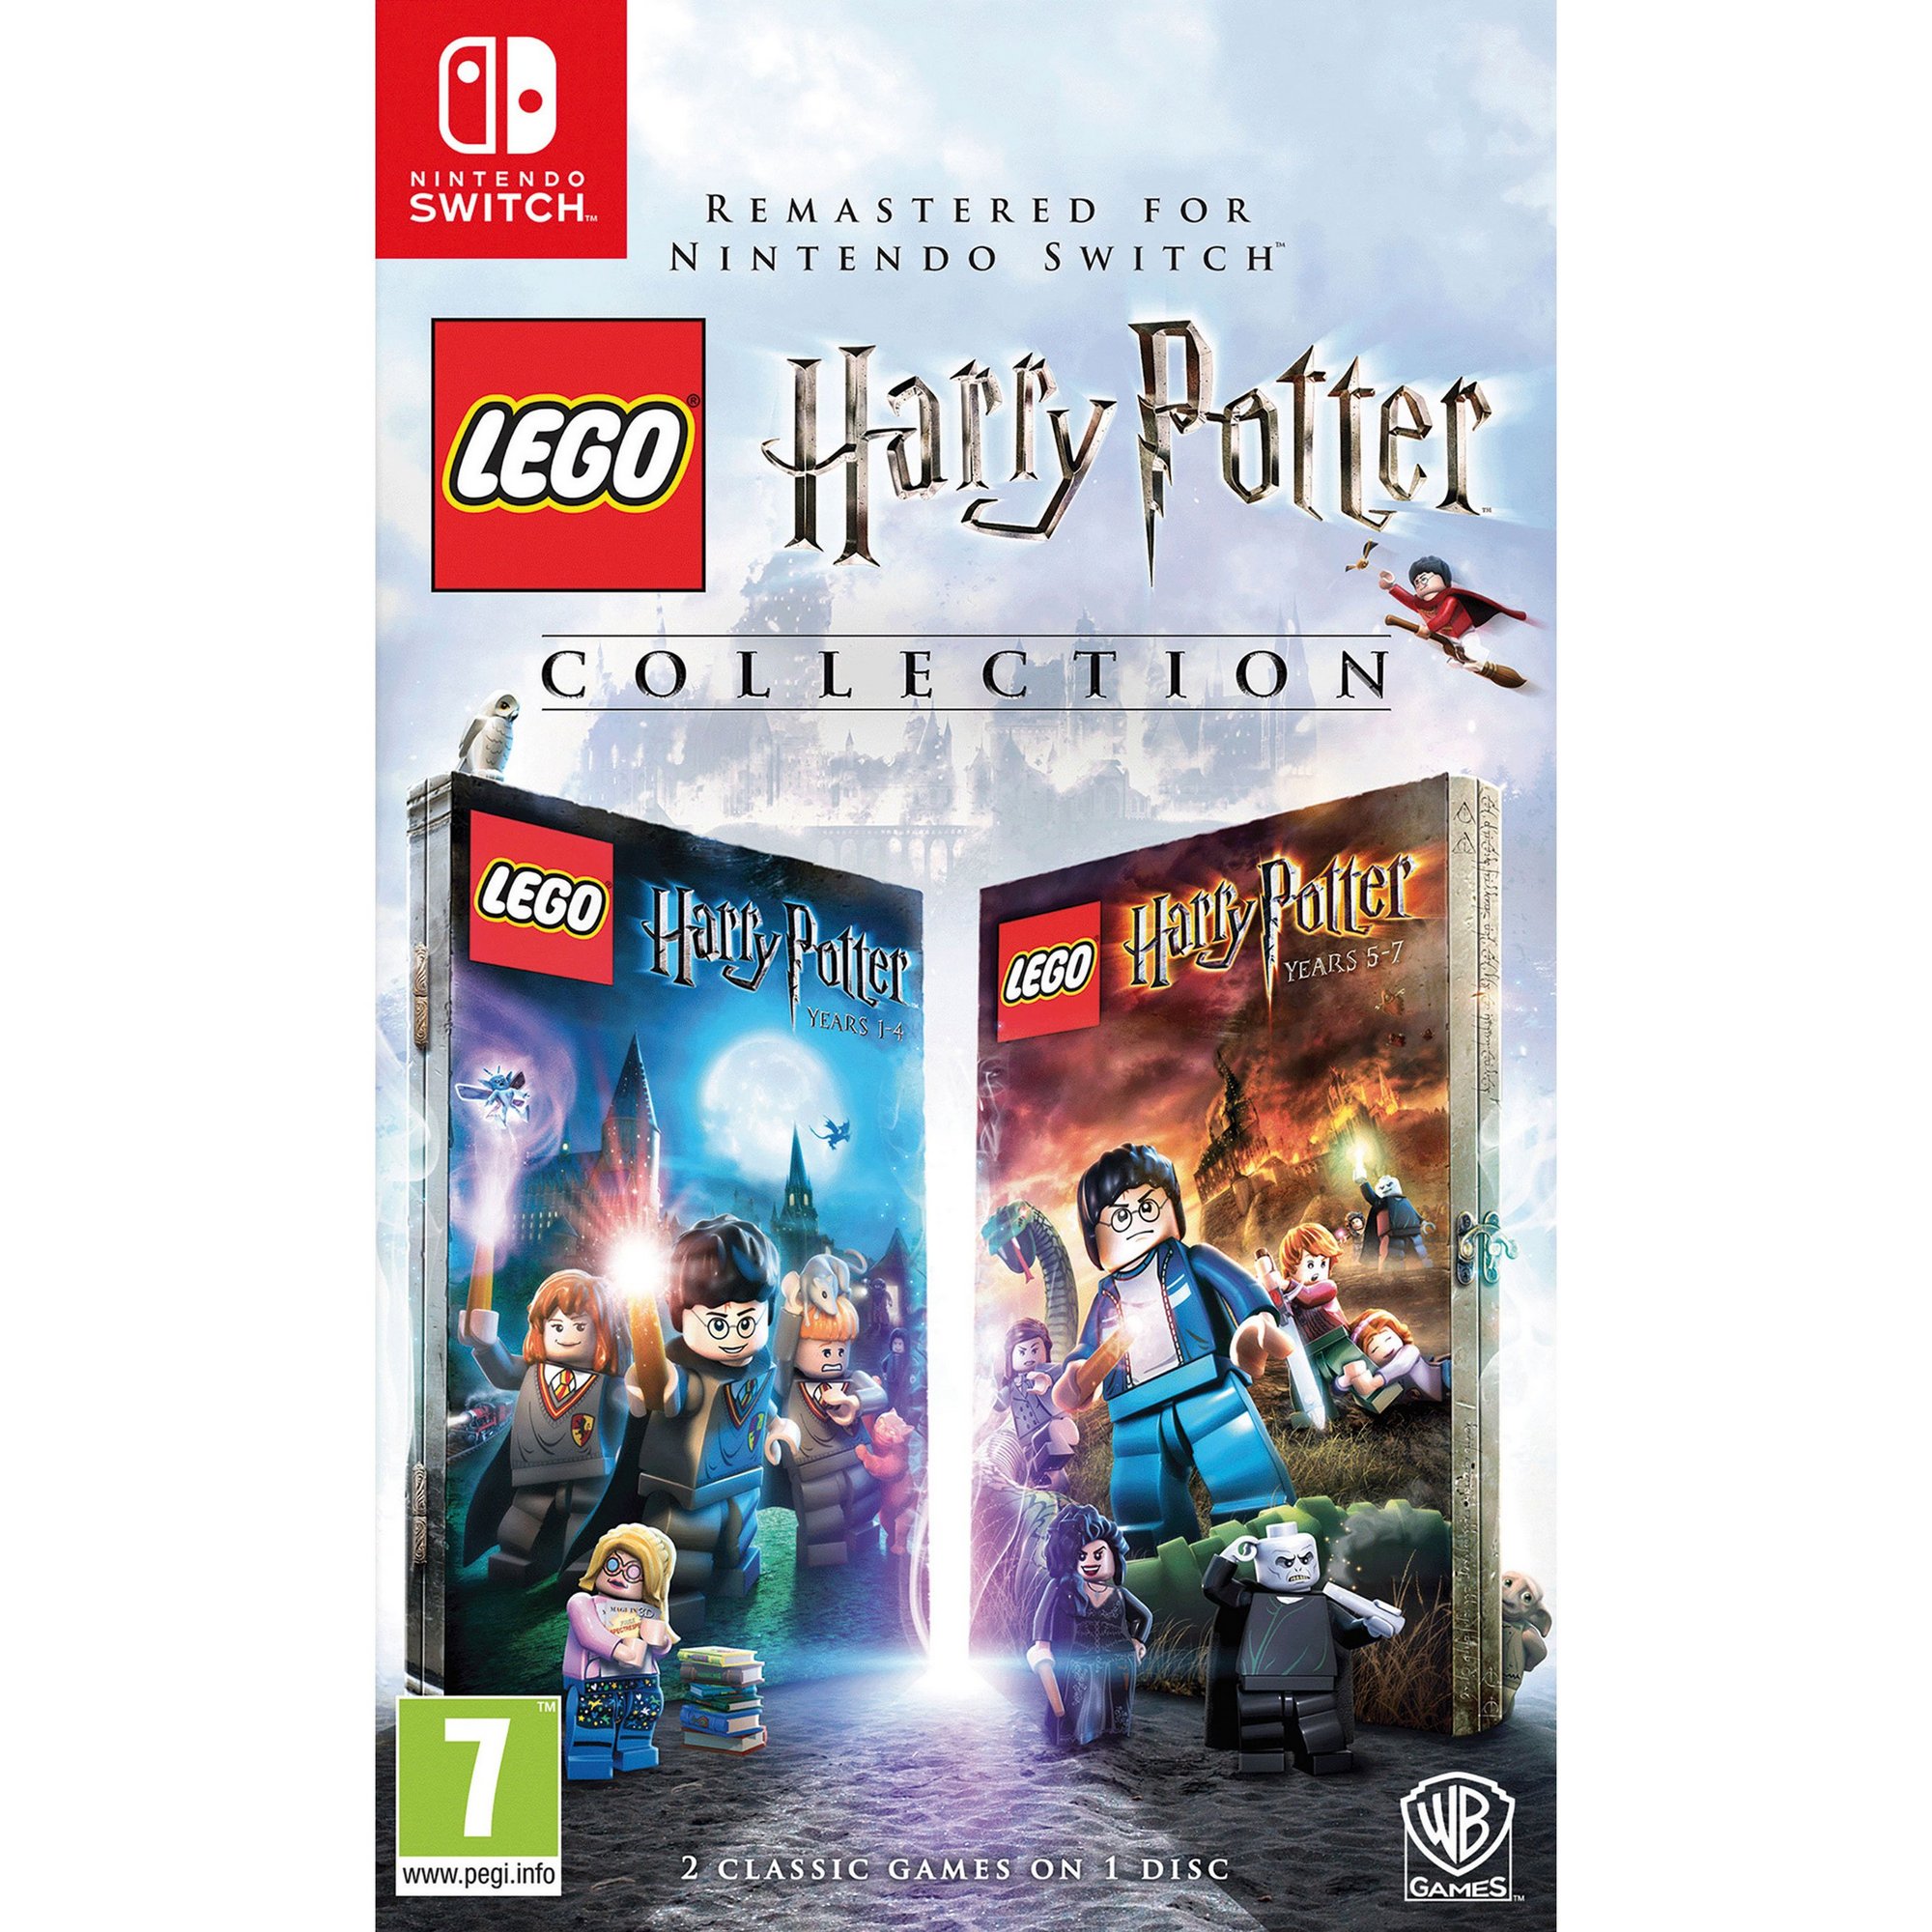 Nintendo Switch: LEGO Harry Potter Collection